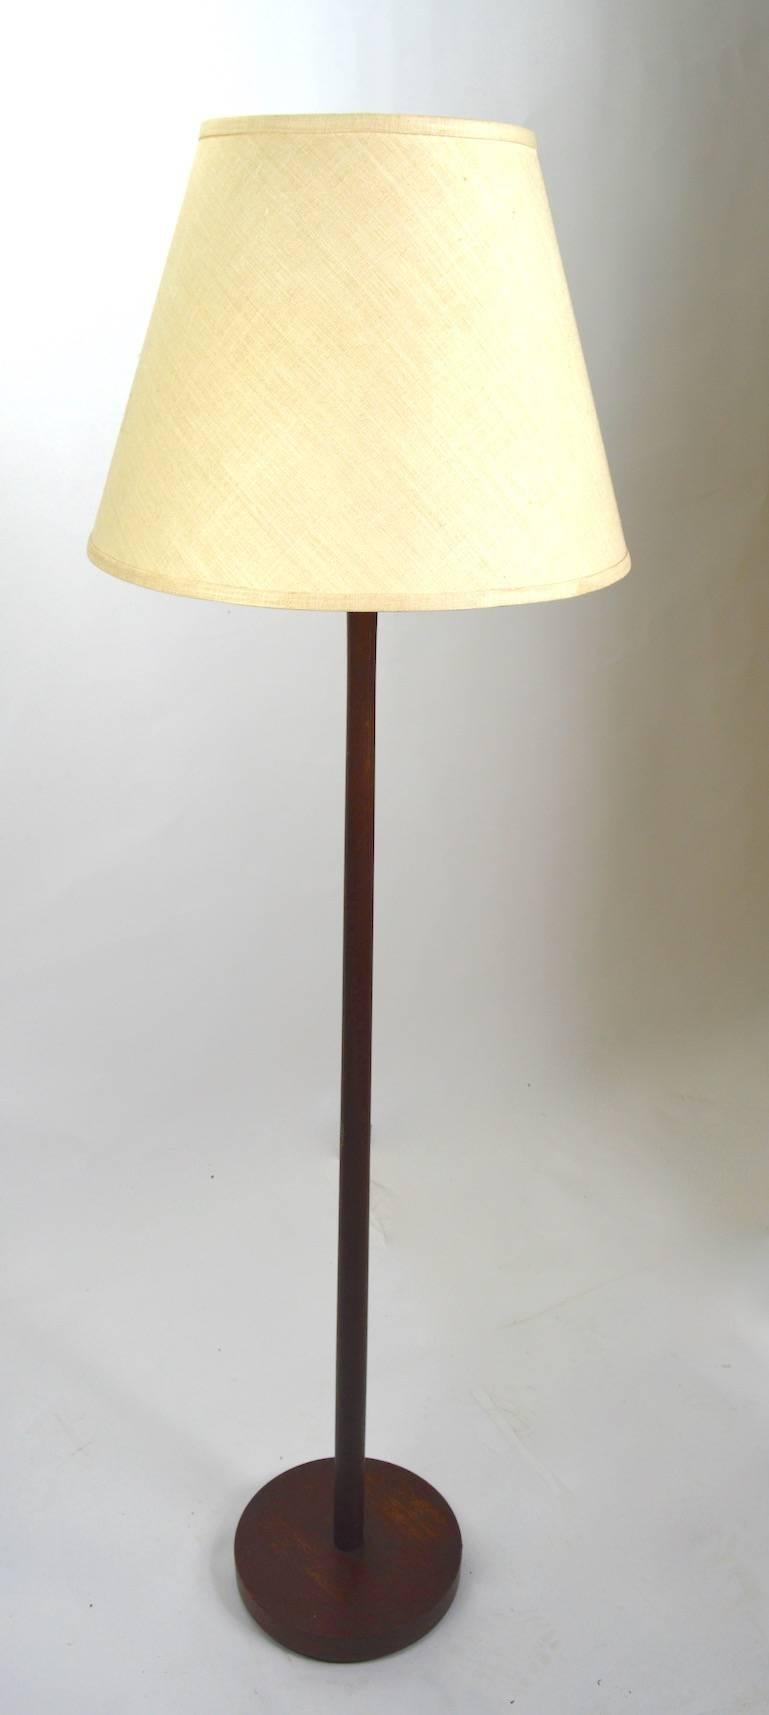 Wood pole lamps with original shades, by the Laurel Lamp Company. Elegant sophisticated form, original and working condition, hard tone find in pairs.
Measures: Shades 16.25 inch diameter at bottom.
 